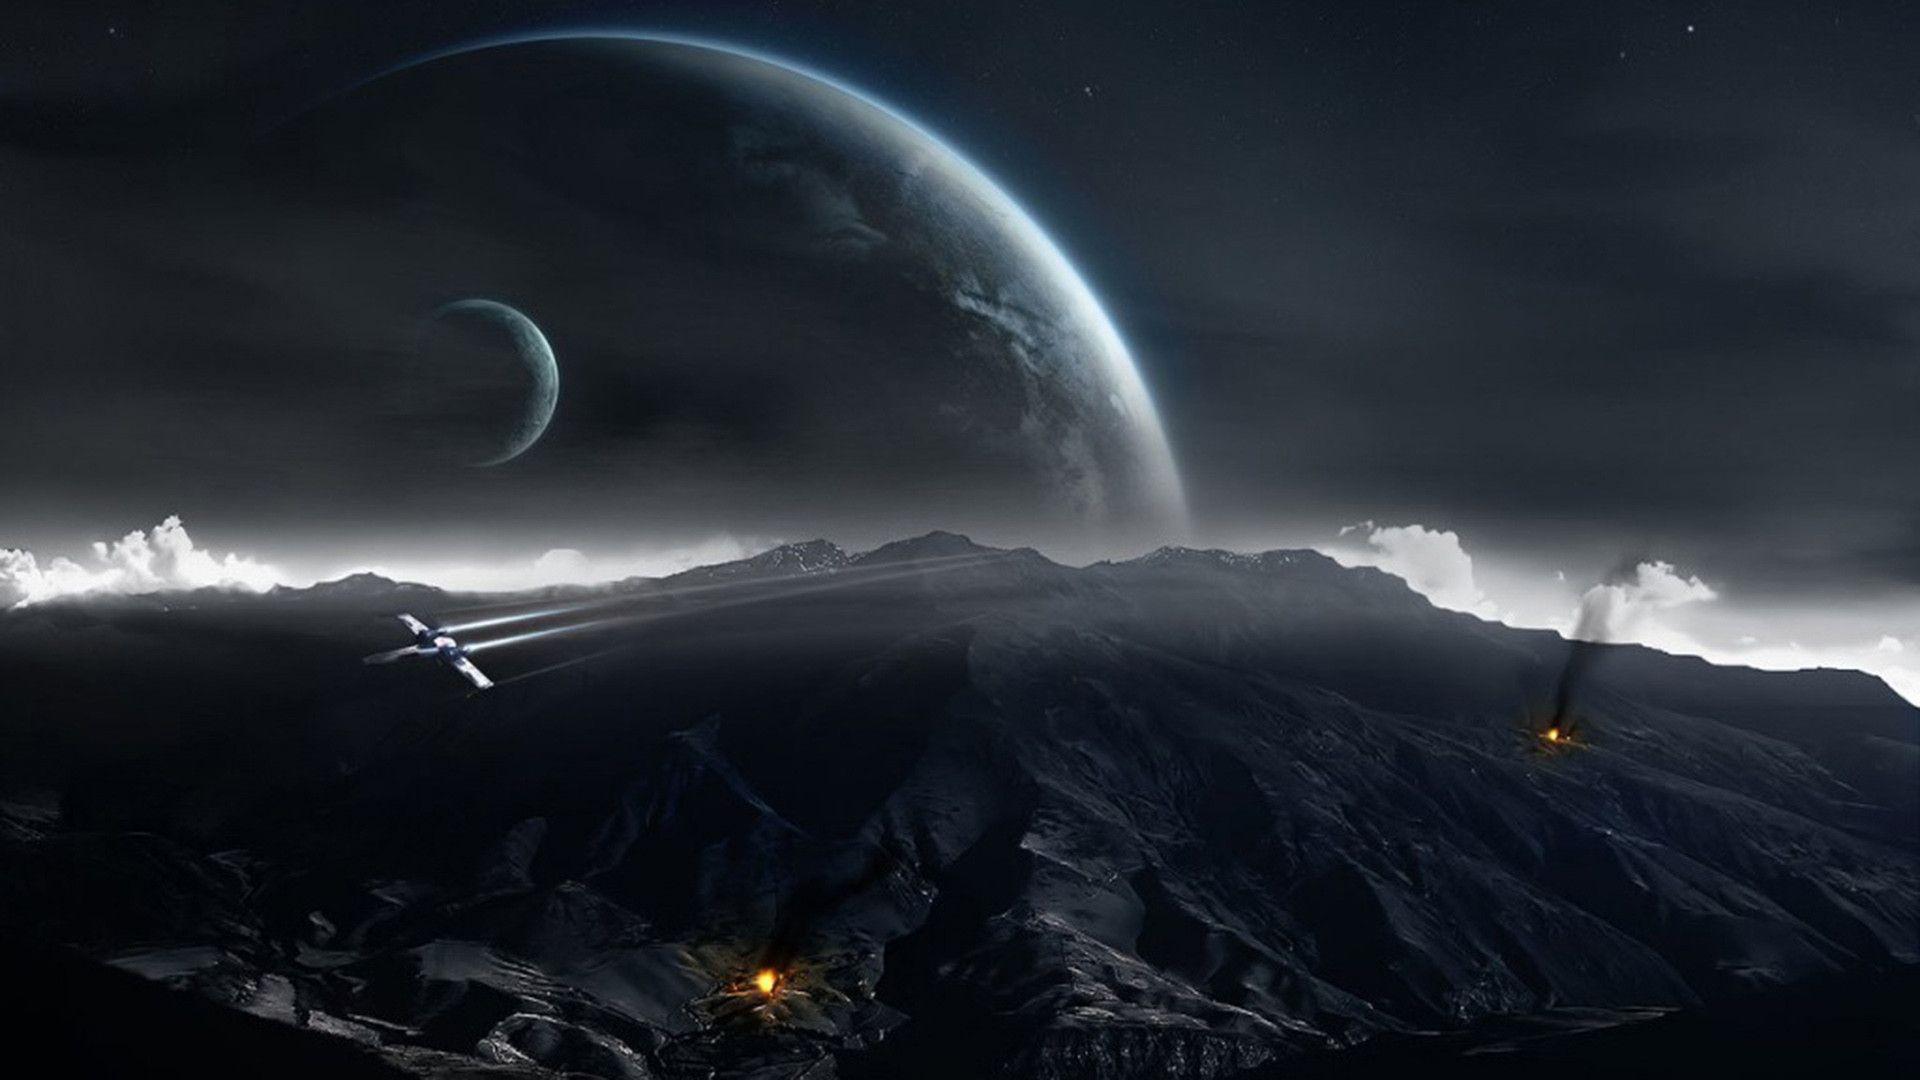 Wallpaper For > Epic Space Wallpaper HD 1080p